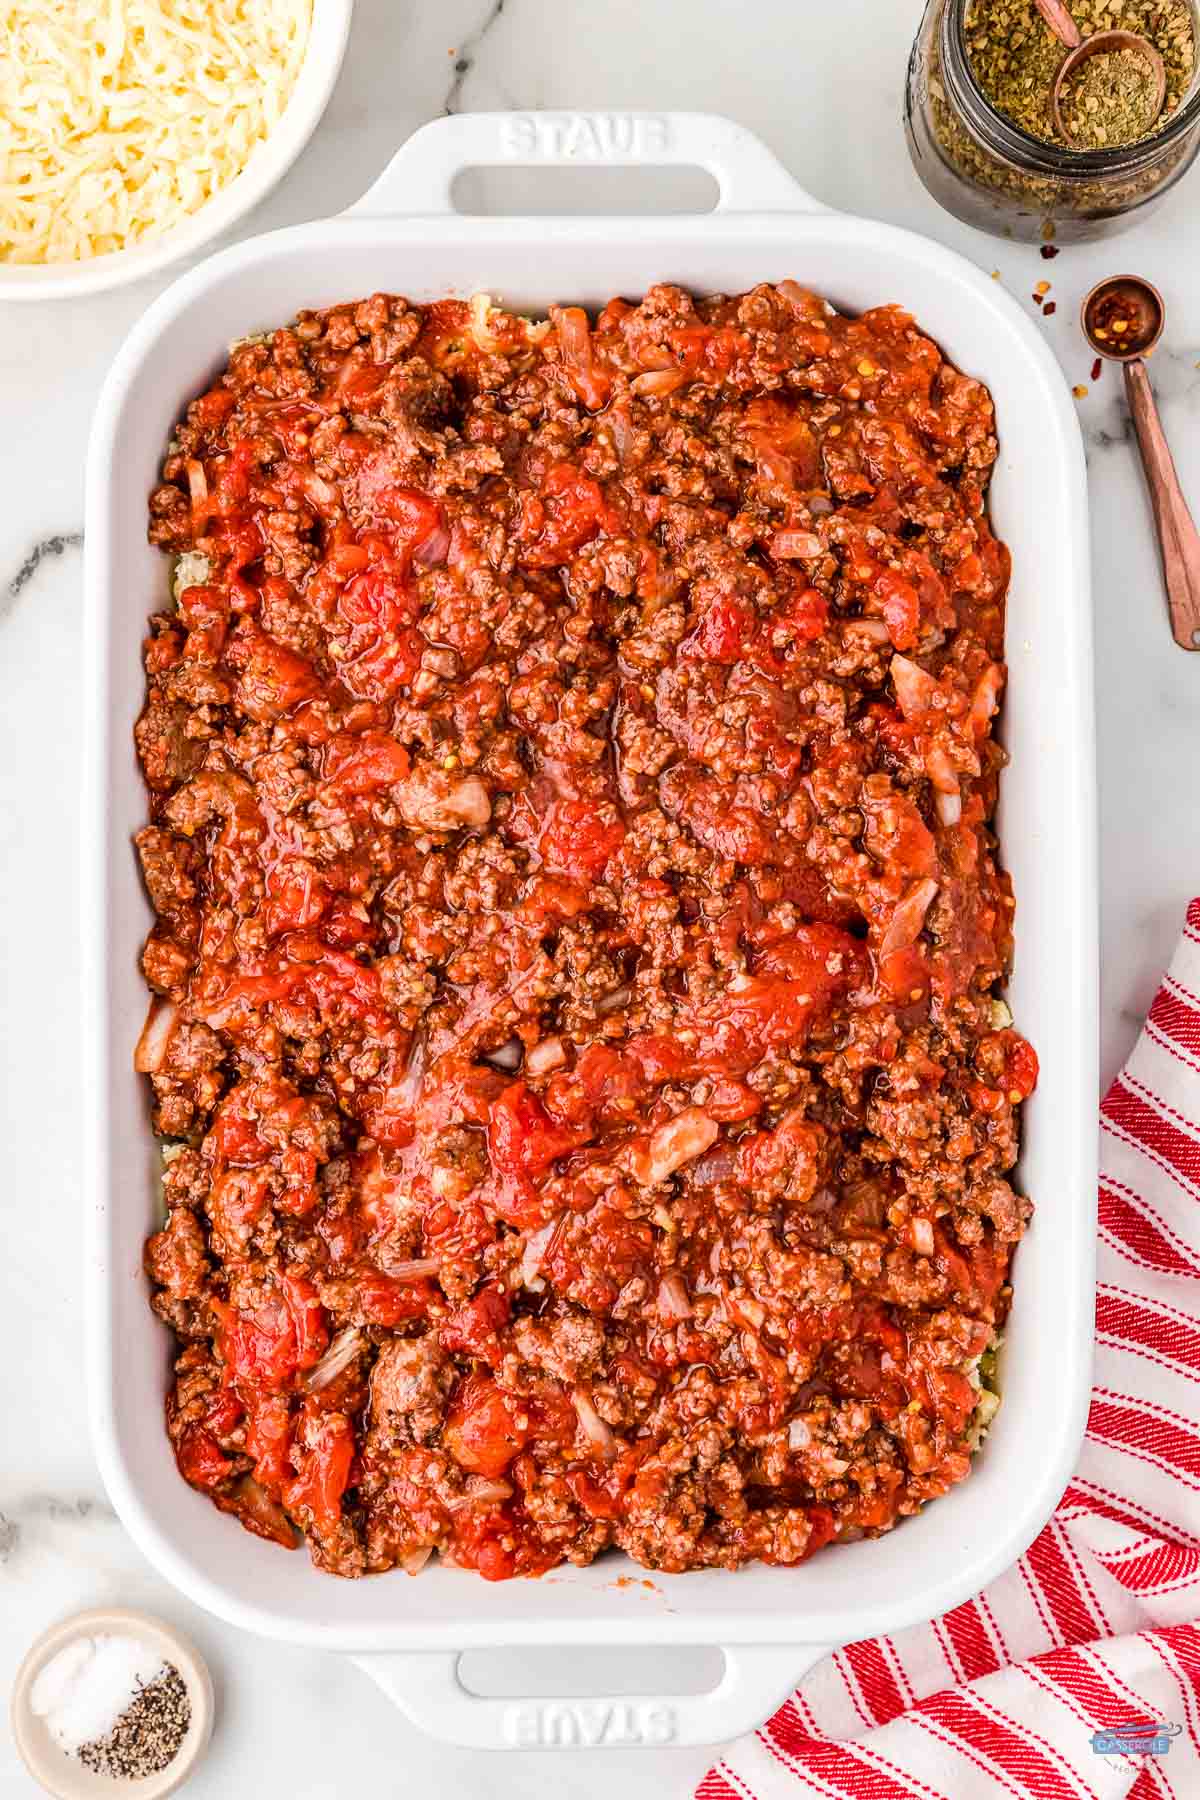 meat sauce in a white casserole dish